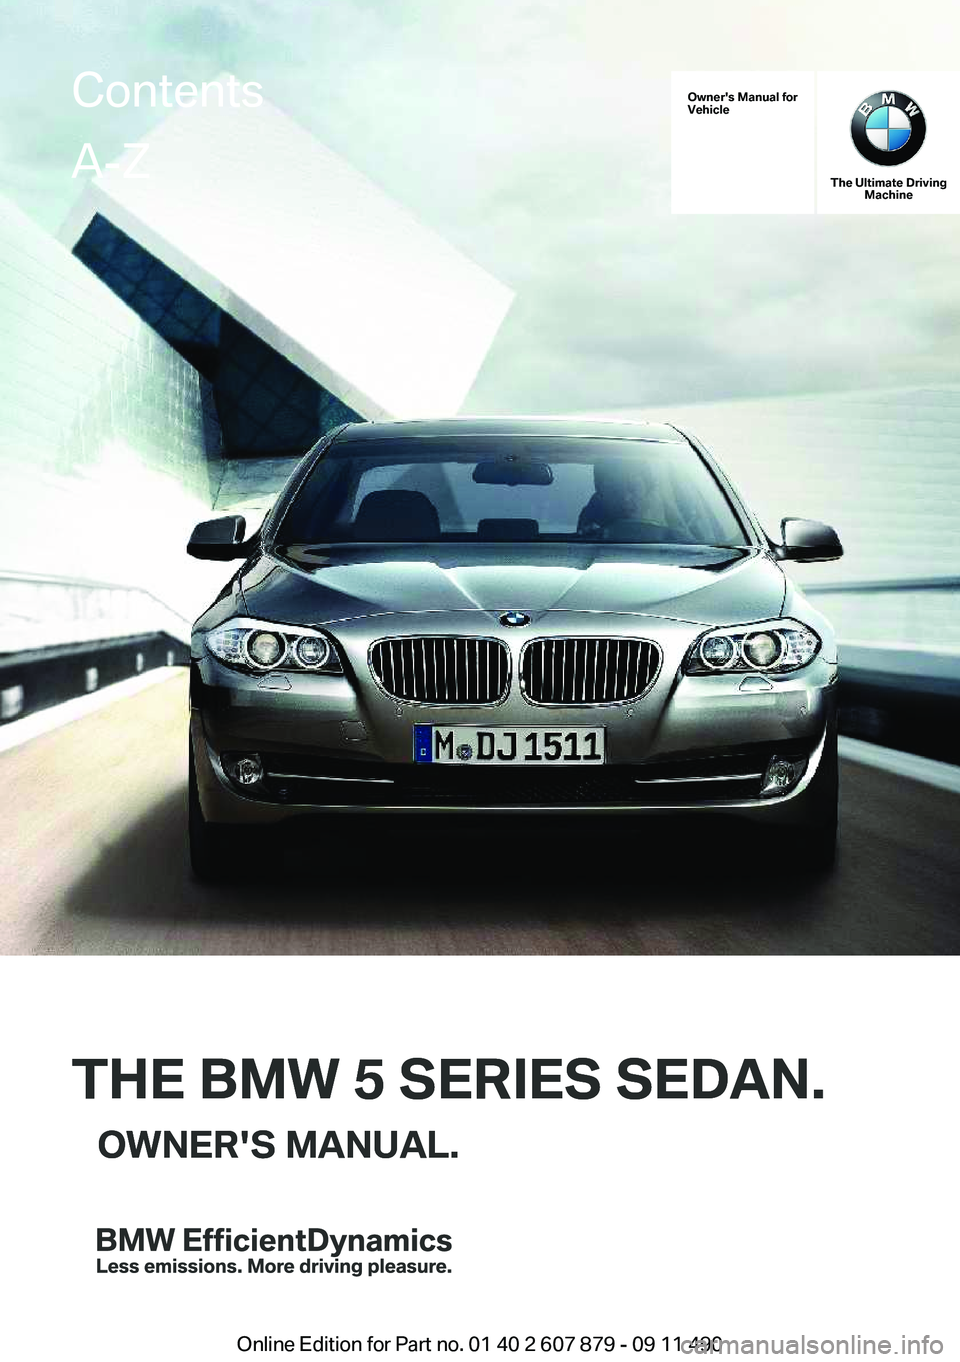 BMW 535I XDRIVE SEDAN 2012  Owners Manual Owner's Manual for
Vehicle
THE BMW 5 SERIES SEDAN.OWNER'S MANUAL.
The Ultimate Driving Machine
THE BMW 5 SERIES SEDAN.OWNER'S MANUAL.
ContentsA-Z
Online Edition for Part no. 01 40 2 607 87